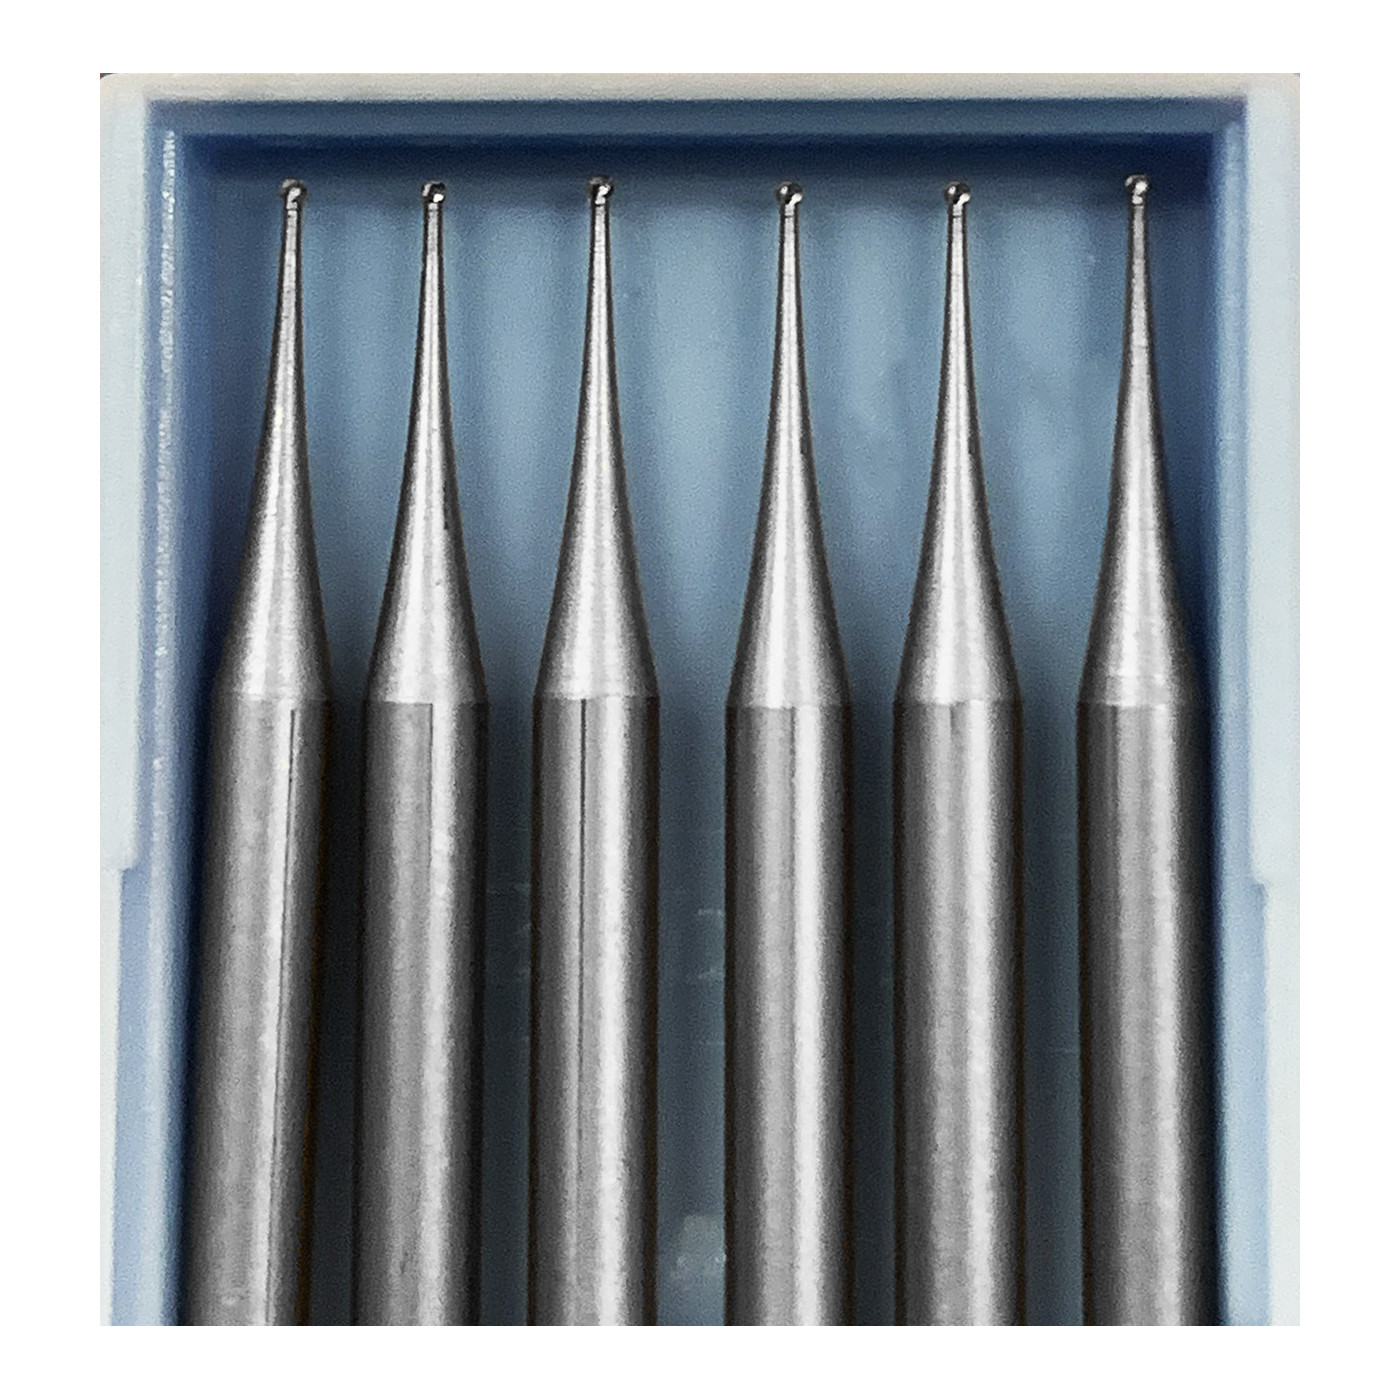 6 HSS mini milling cutters, 0.5x40 mm (ball nose only)